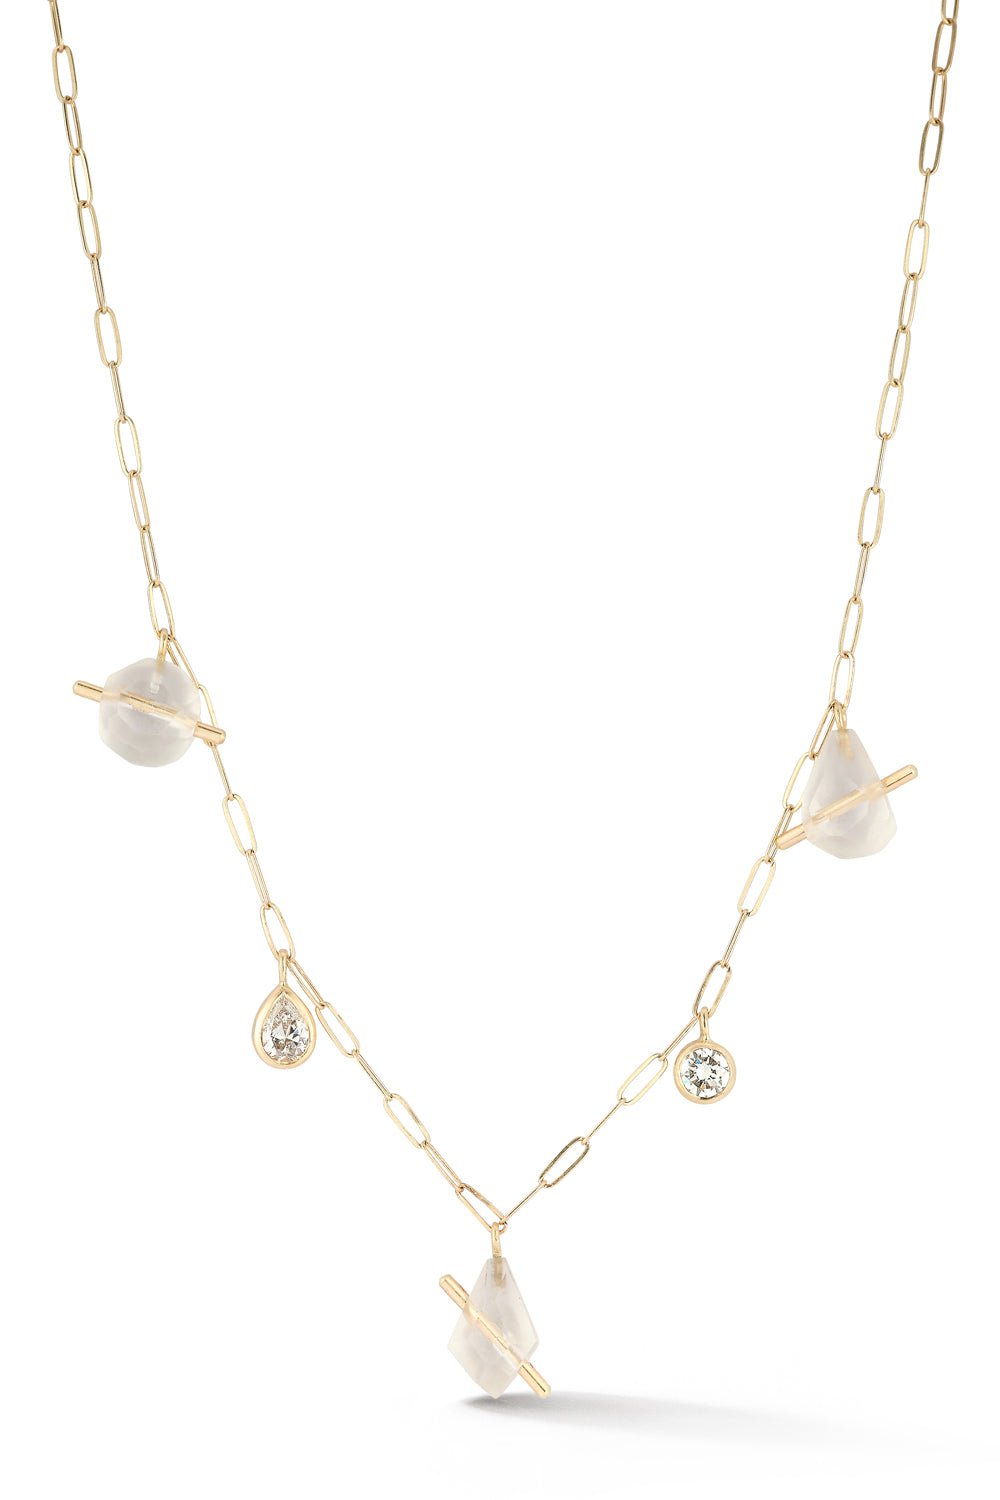 OLIVIA SHIH-Lucid Quintuplet Necklace-RECYCLED GOLD (WHEN POSSIBLE)